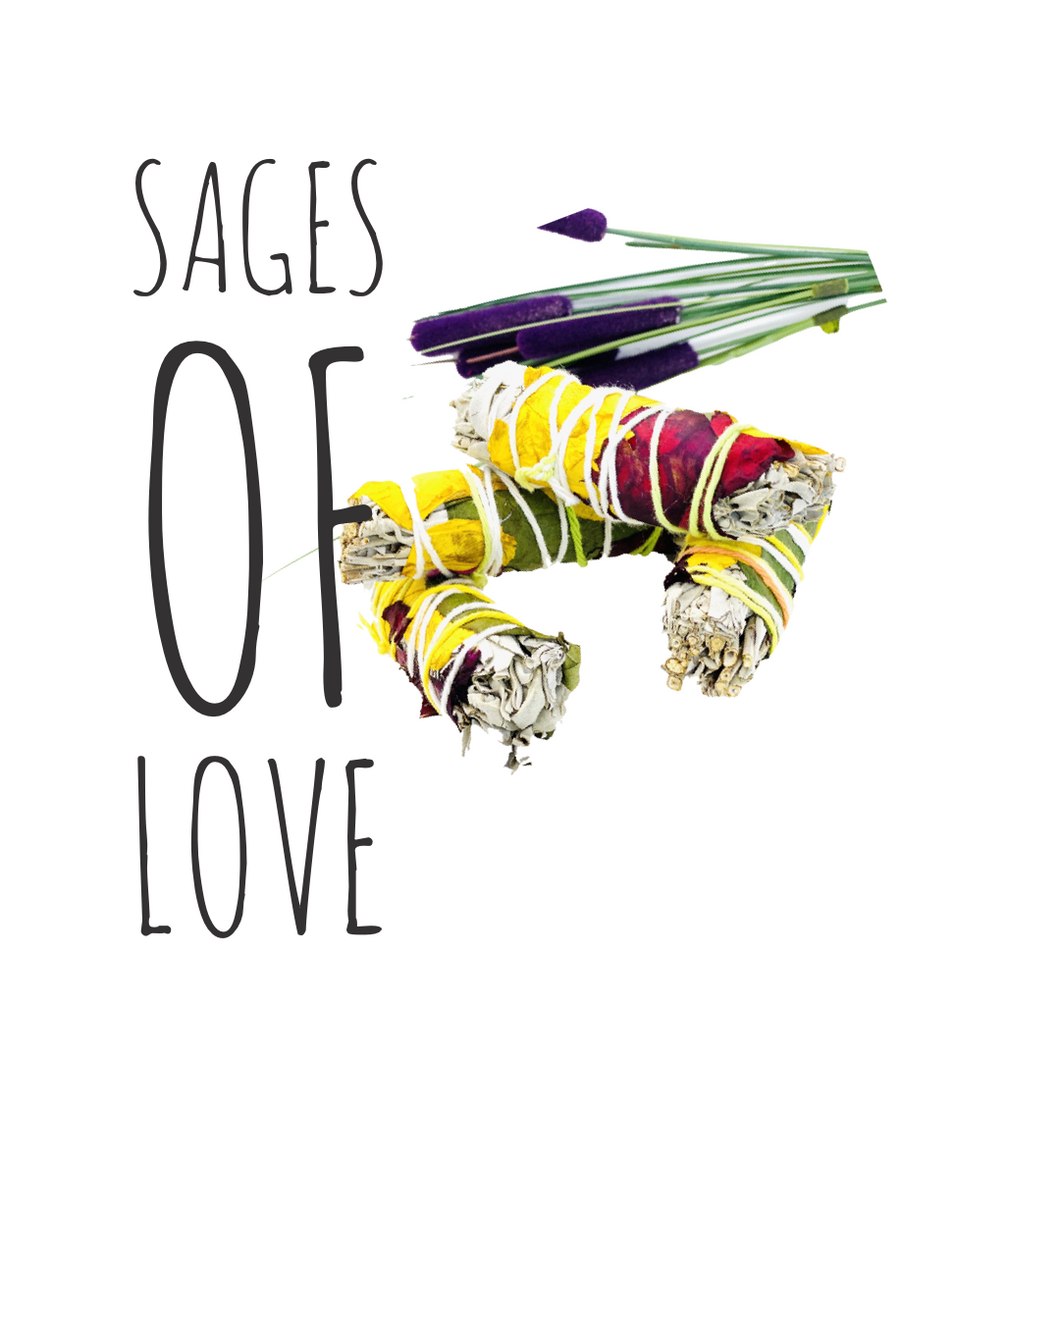 Sages Of Love